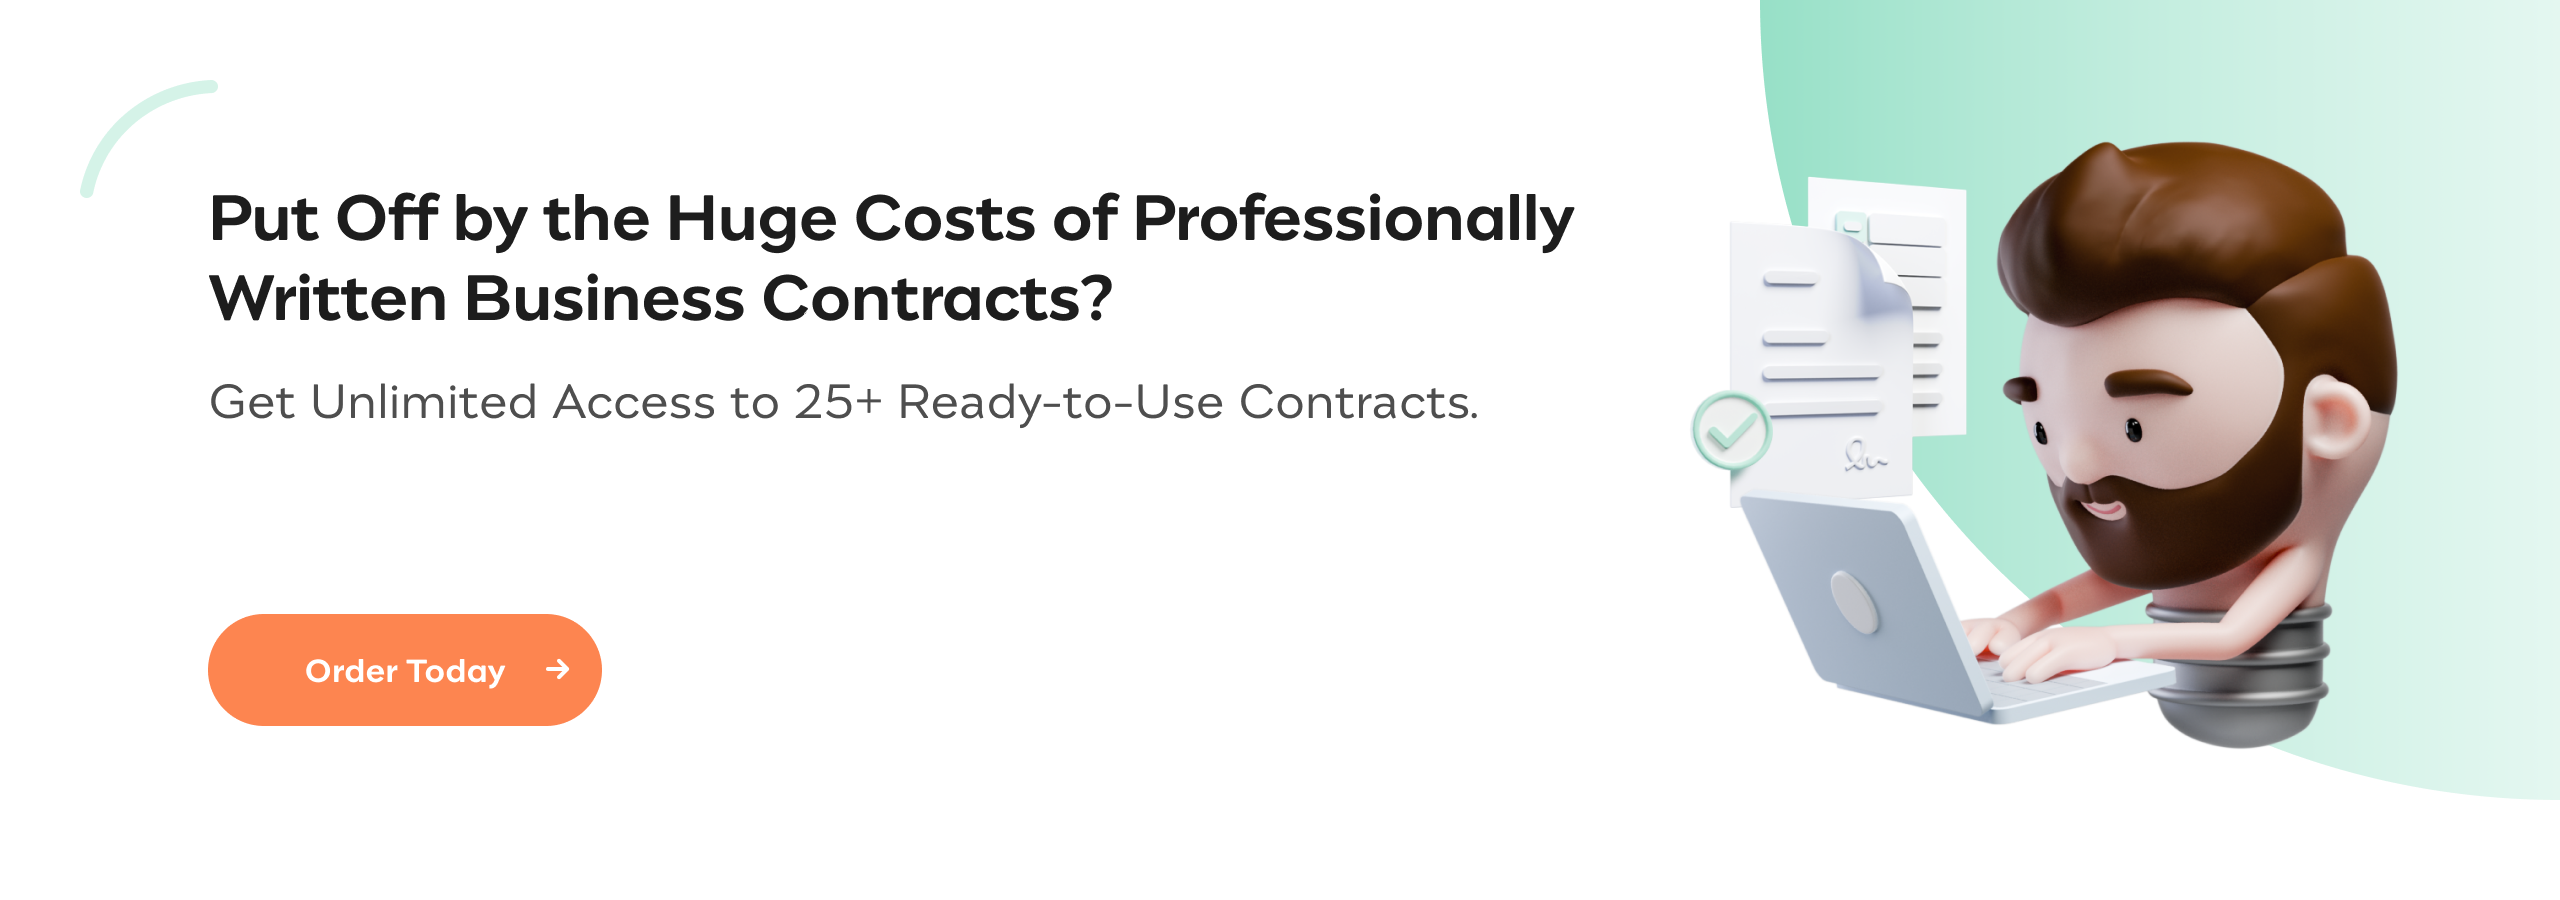 Put Off by the Huge Costs of Professionally Written Business Contracts? Get Unlimited Access to 25+ Ready-to-Use Contracts.